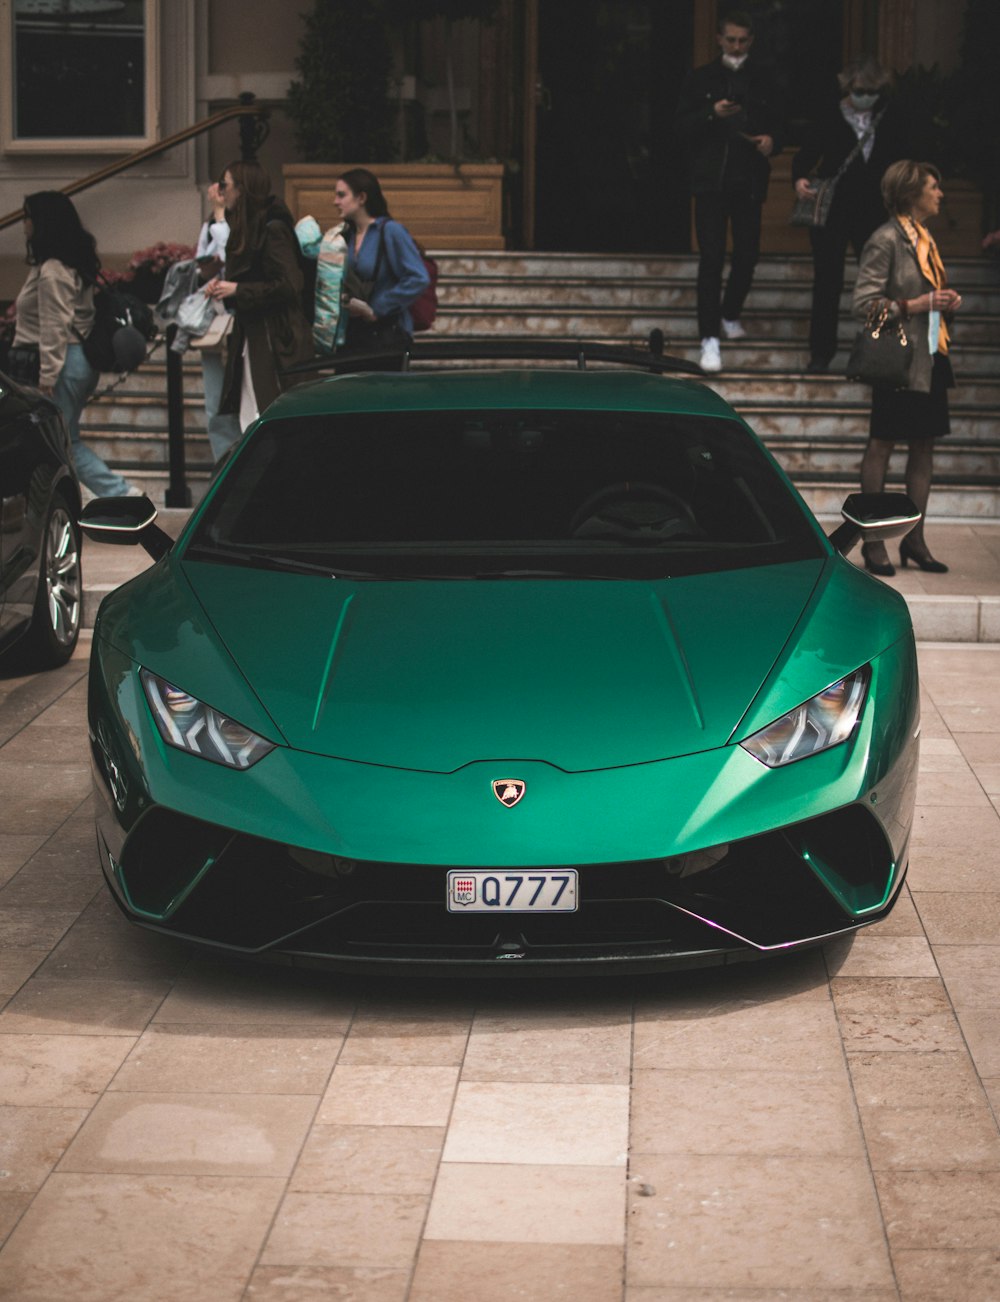 a green sports car parked in front of a building